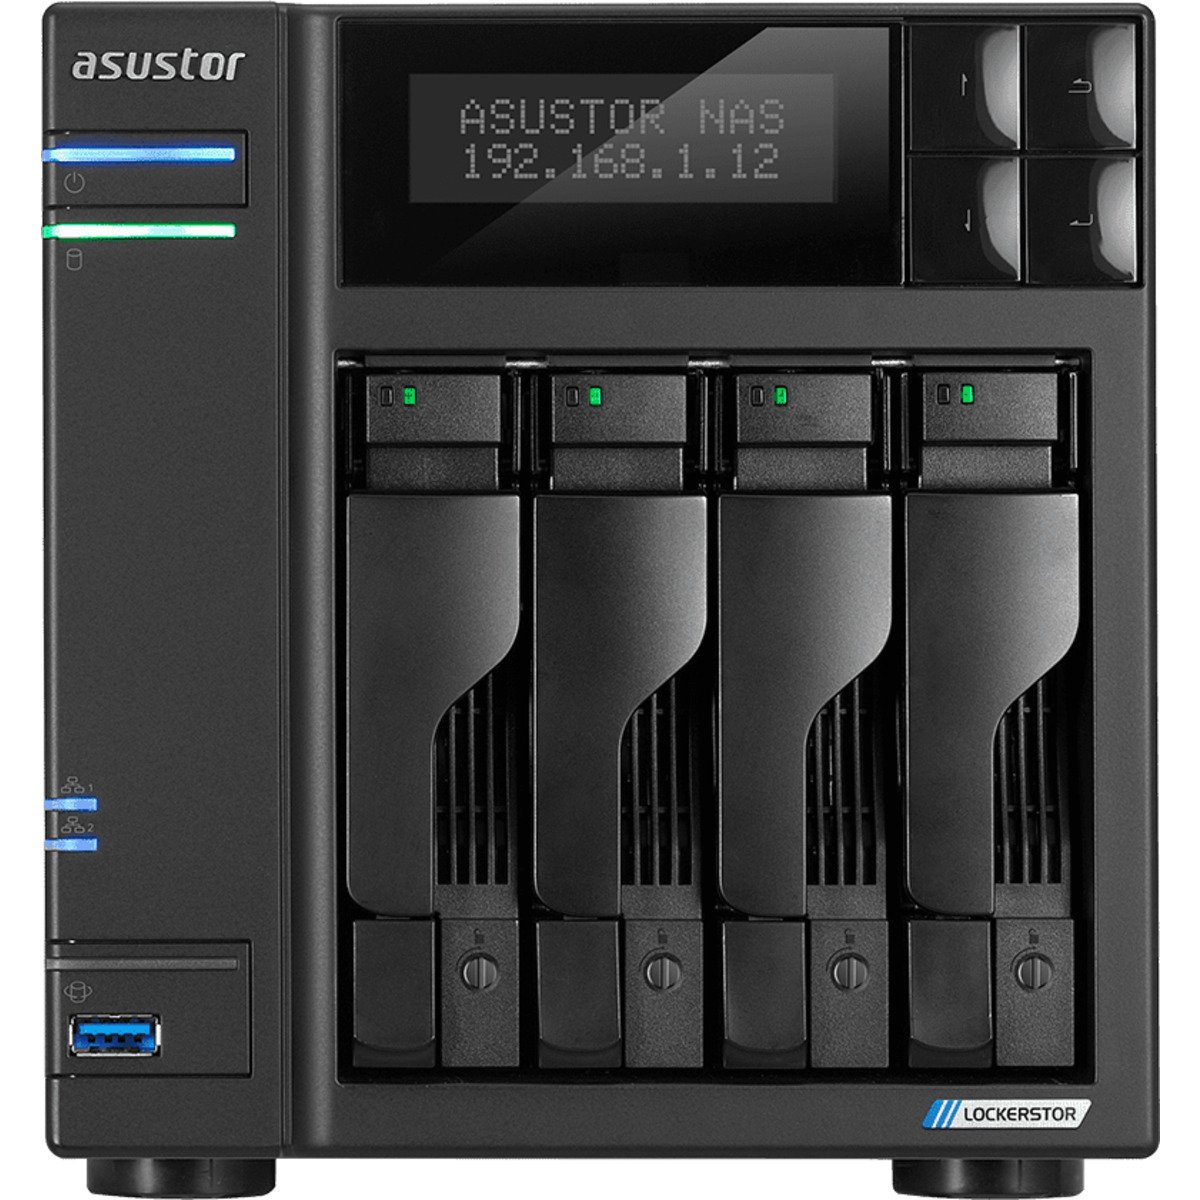 ASUSTOR AS6604T Lockerstor 4 48tb 4-Bay Desktop Multimedia / Power User / Business NAS - Network Attached Storage Device 4x12tb Seagate IronWolf Pro ST12000NT001 3.5 7200rpm SATA 6Gb/s HDD NAS Class Drives Installed - Burn-In Tested - ON SALE - FREE RAM UPGRADE AS6604T Lockerstor 4